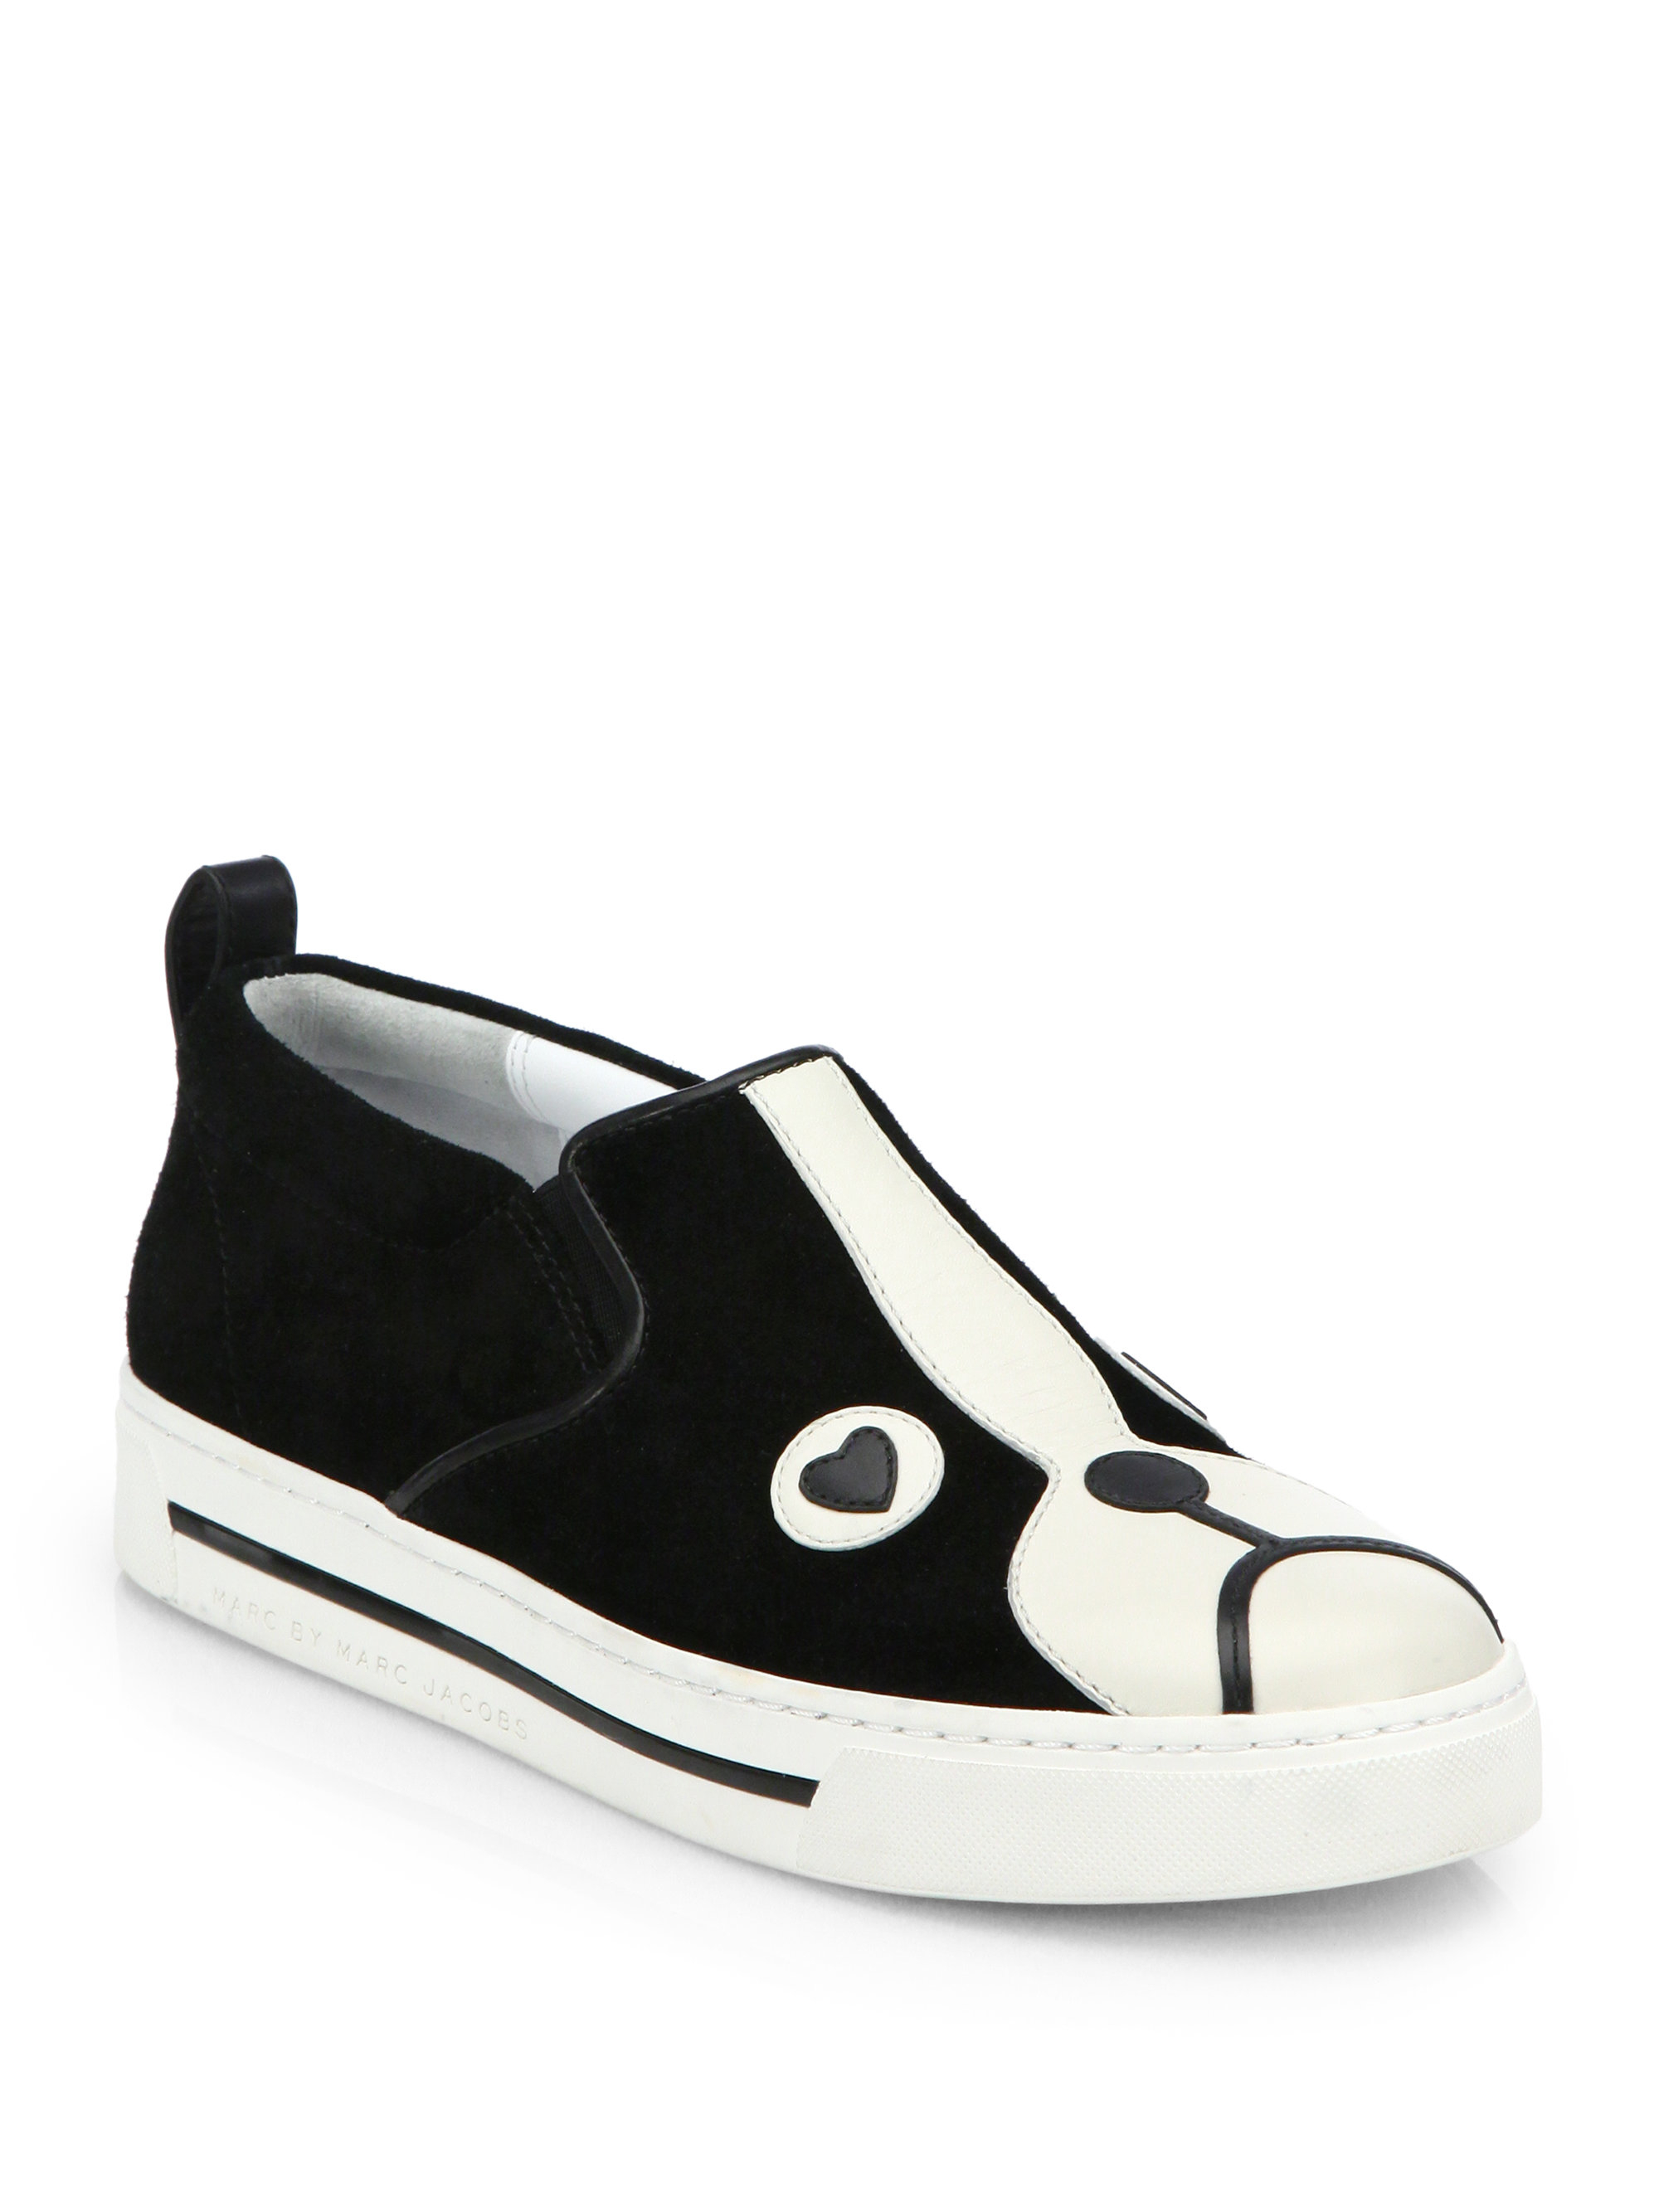 marc jacobs slip on shoes